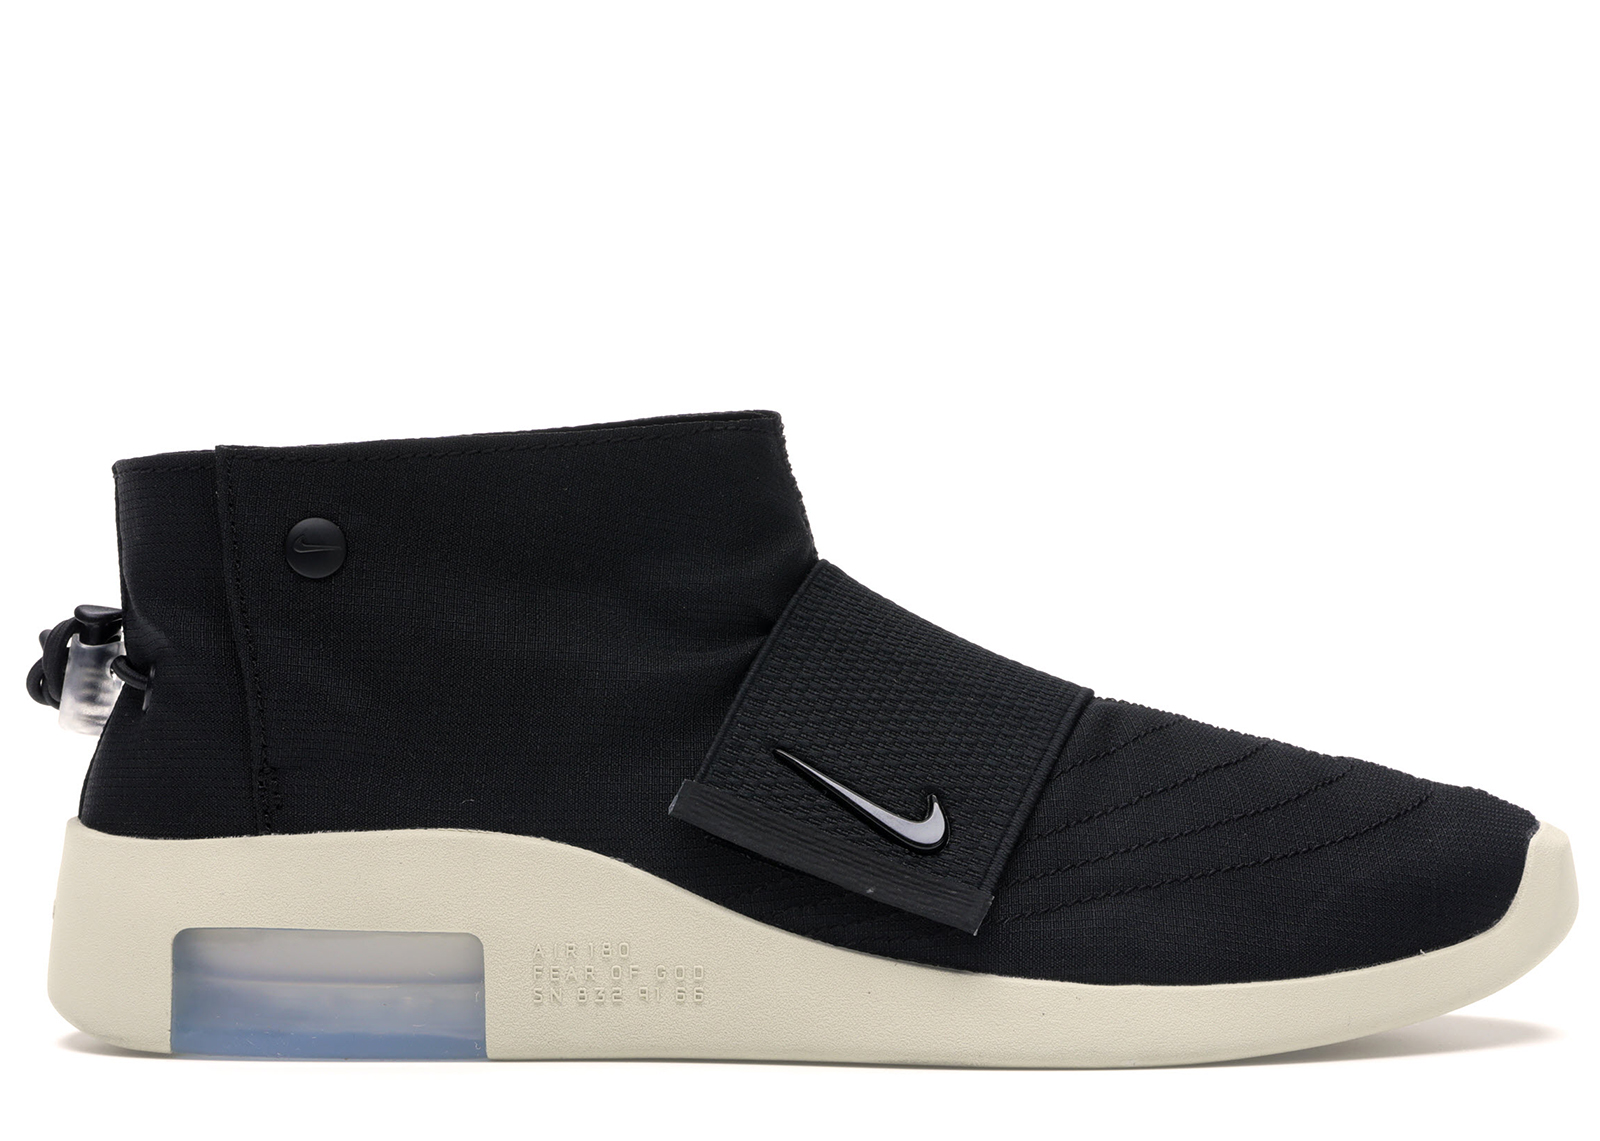 Nike Air Fear Of God Moccasin Black - AT8086-002